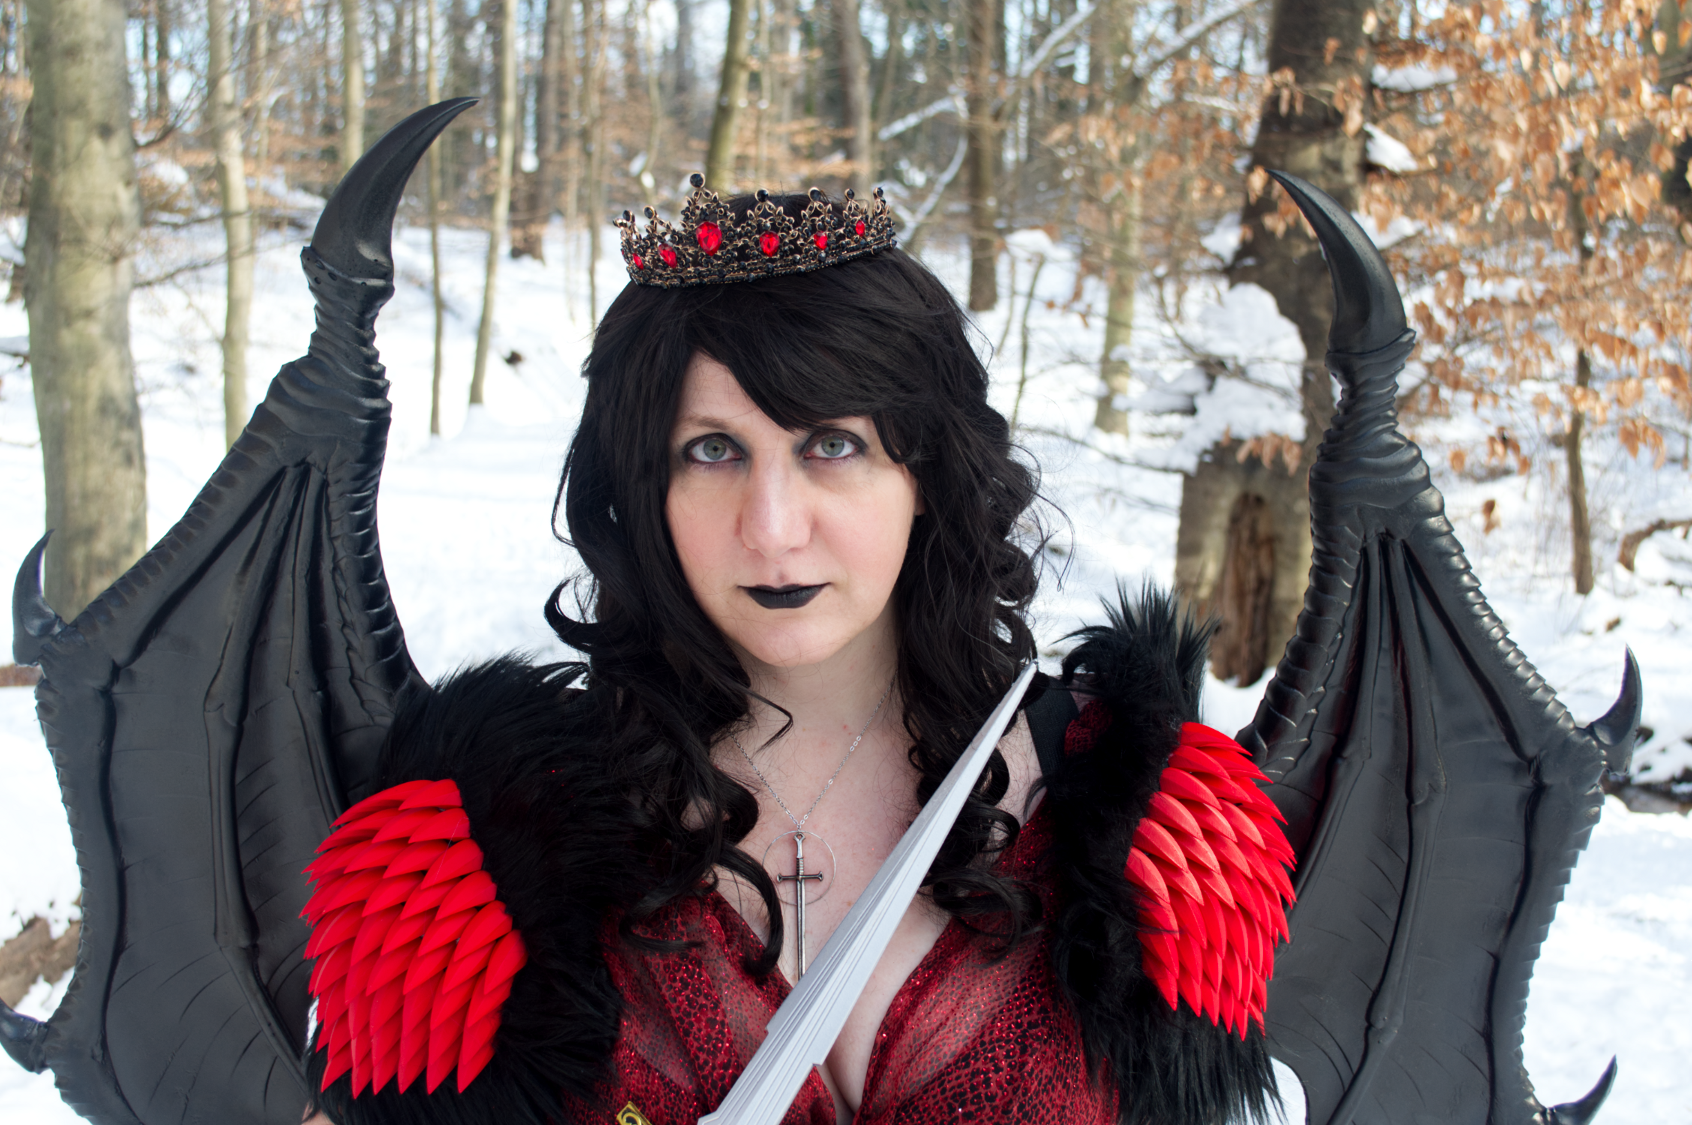 Cosplay portrait of a woman with long dark wavy hair wearing a crown, a red snakeprint dress, shoulder armor with spikes and fur, and dragon wings.